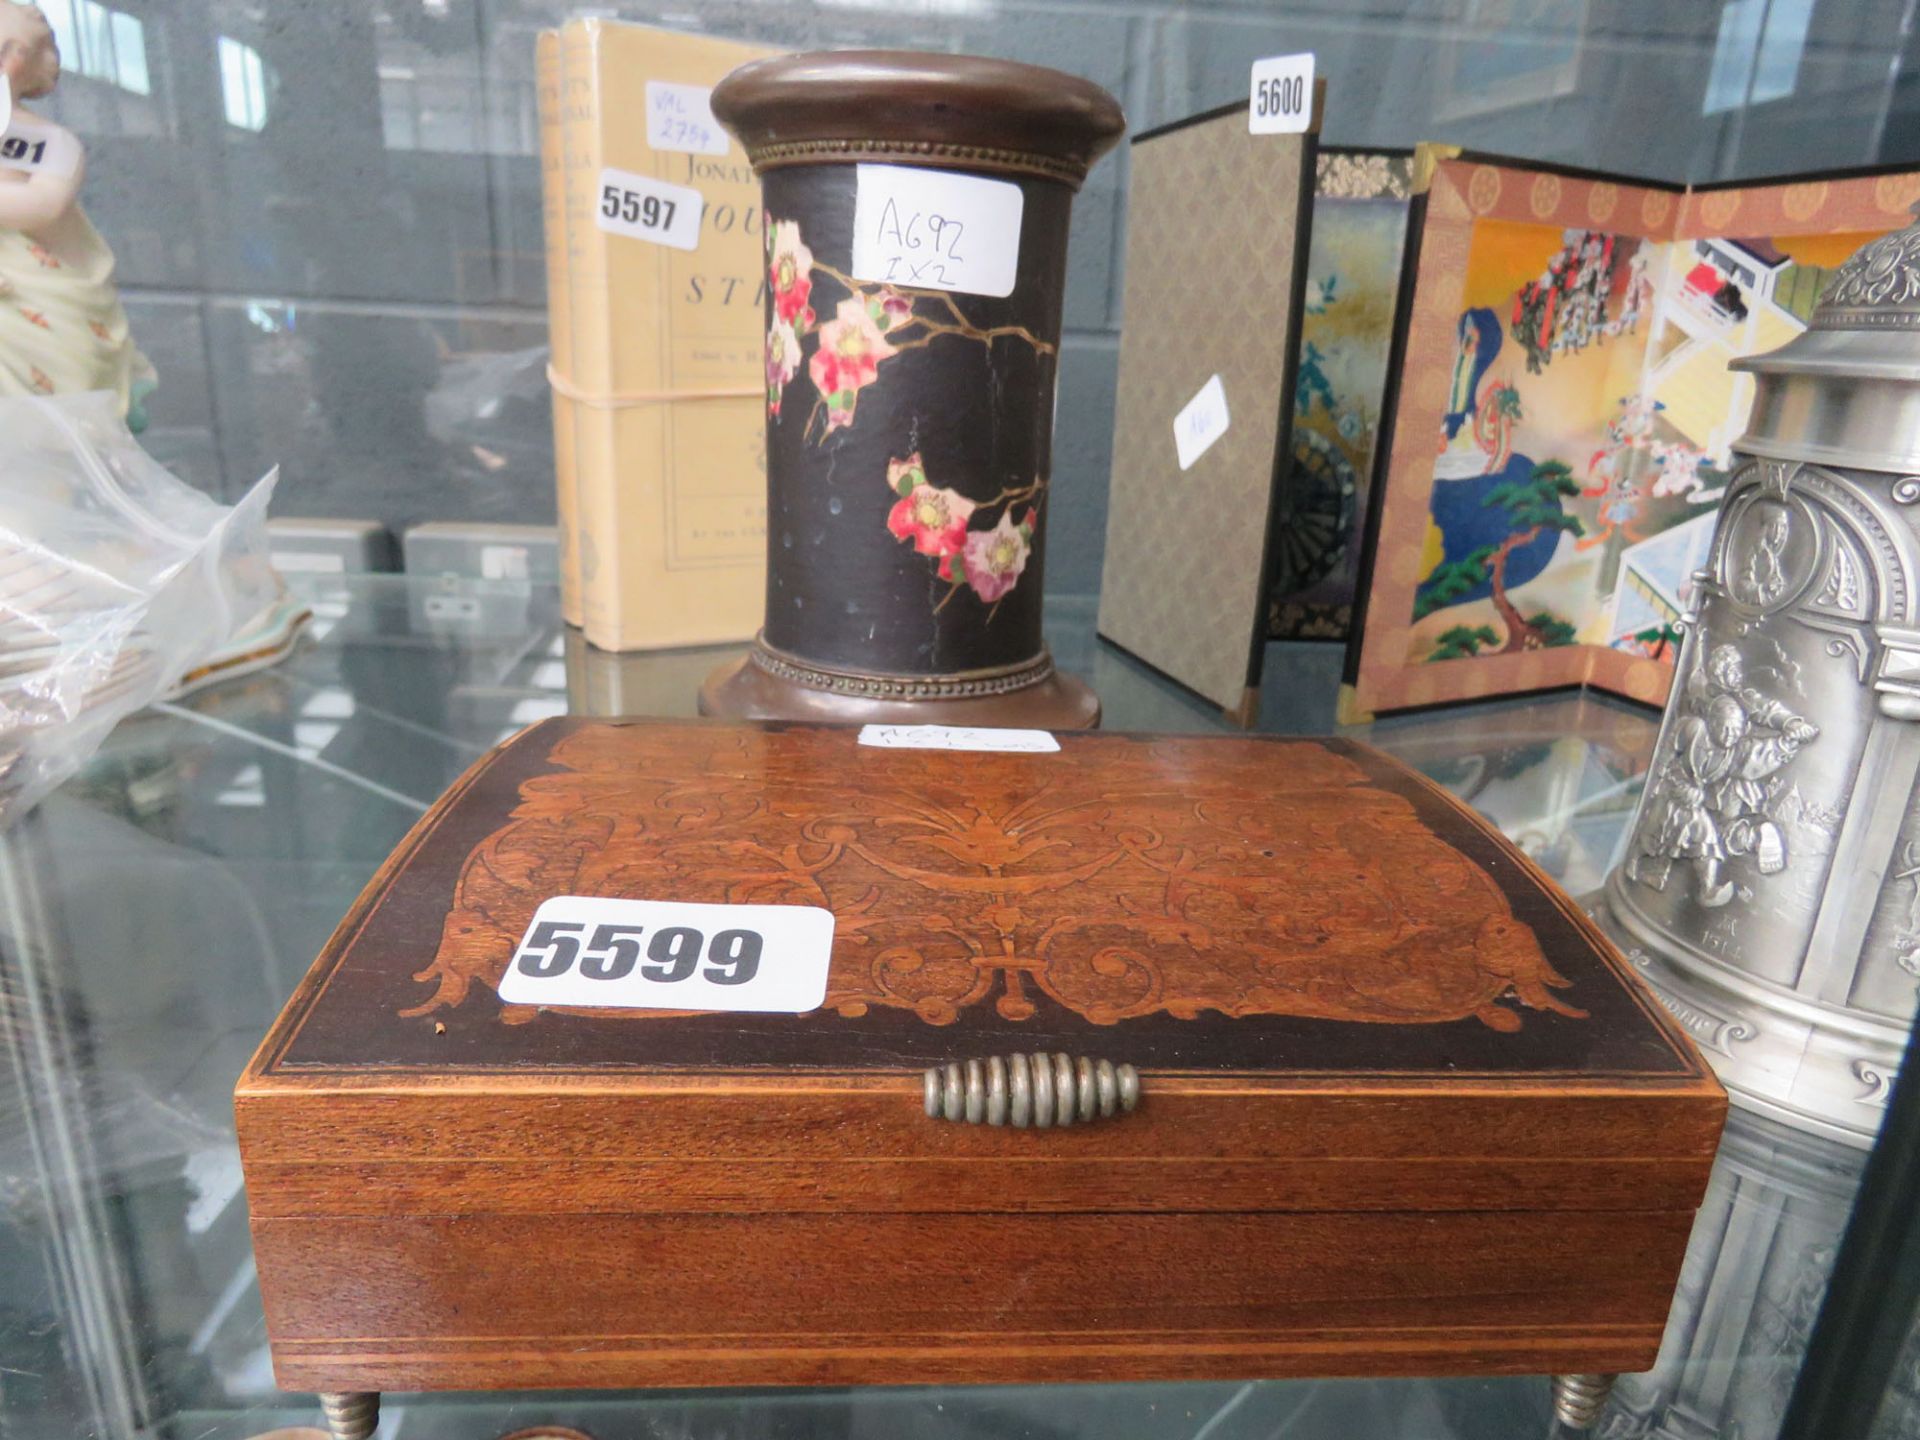 Bronze bird and floral patterned vase plus a wooden cigarette box